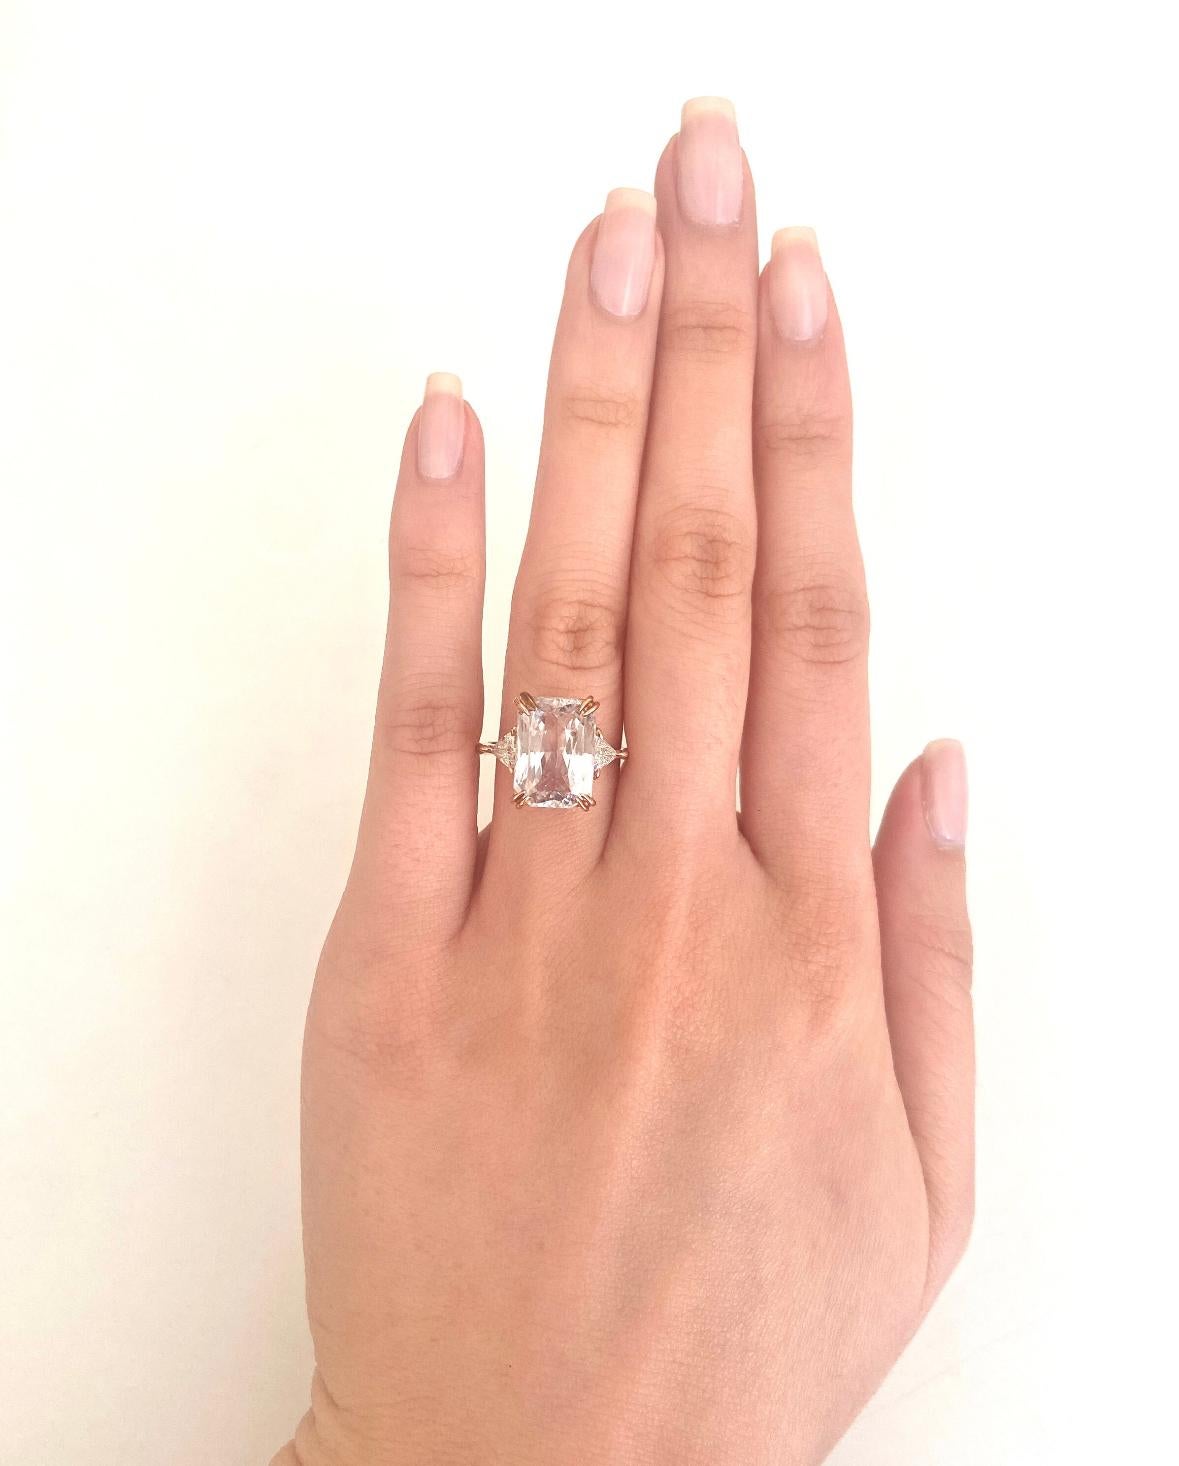 Discover understated elegance with this GIA Certified 3-Stone Light Pink Sapphire Ring featuring radiant cut sapphire and trillion cut diamonds. The natural octagonal-shaped light pink sapphire exudes a subtle charm, complemented by the brilliance